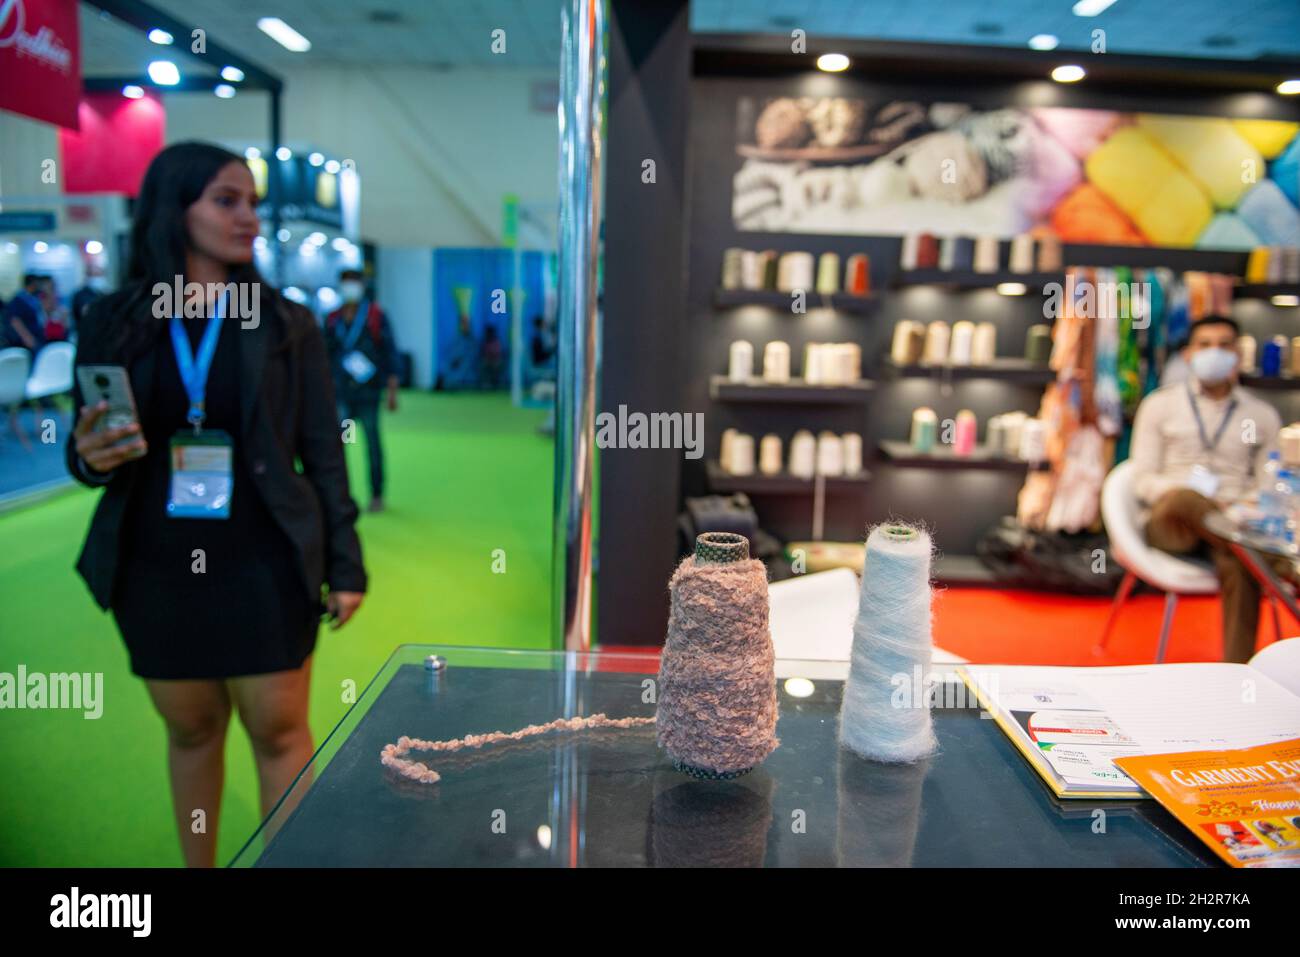 A view of a colorful yarn at a fabric stall during the Textile, Fabrics and Yarns  Trade Shows at Pragati Maidan (exhibition center).(B2B) Business to  Business trade shows related to the textile